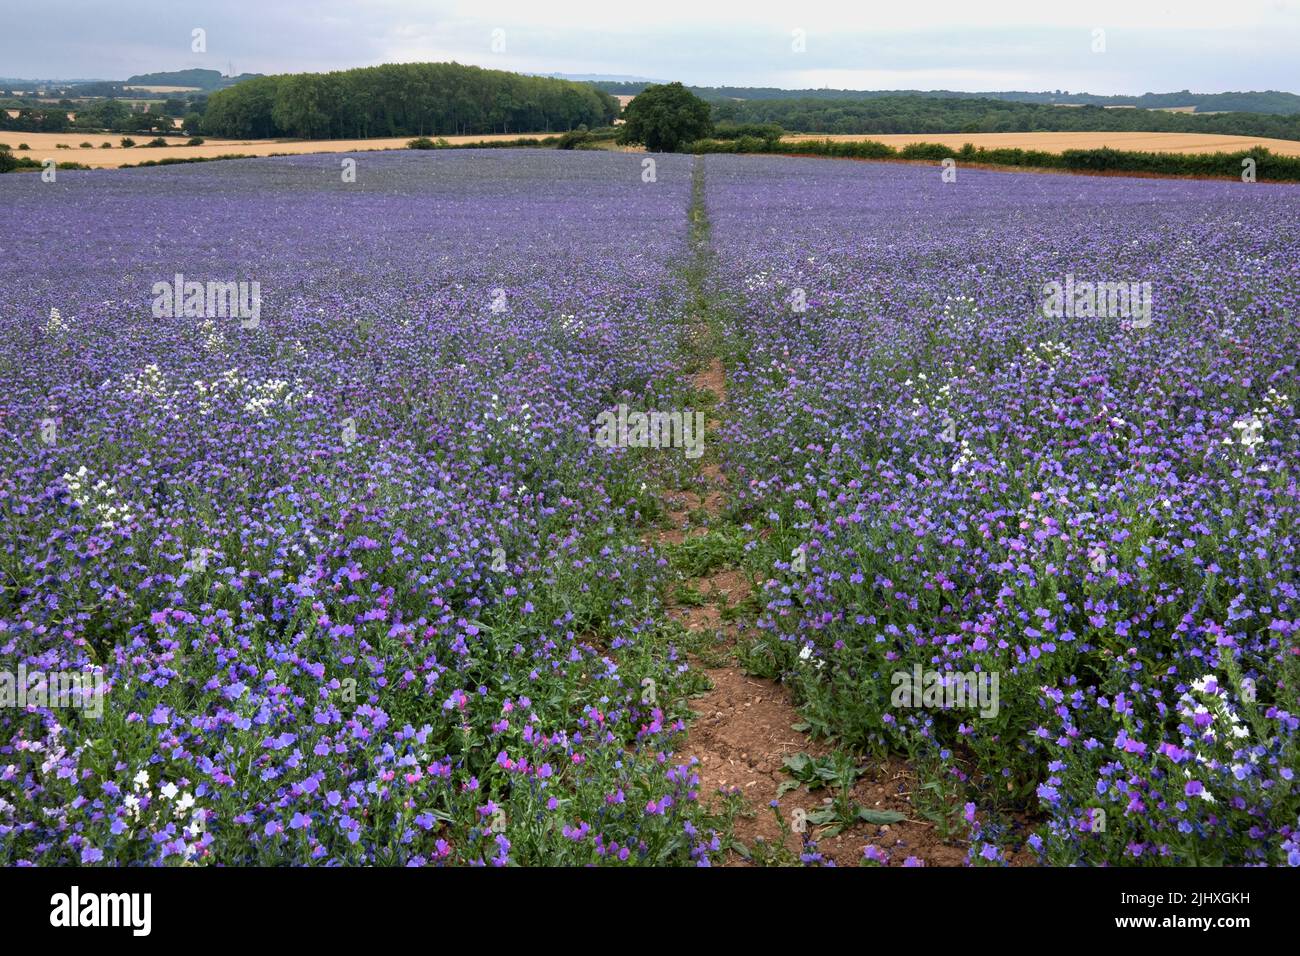 Fields of Echium Wild Flowers in the Warwickshire Countryside, England.  The flowers are also known as Vipers Buglos. Stock Photo